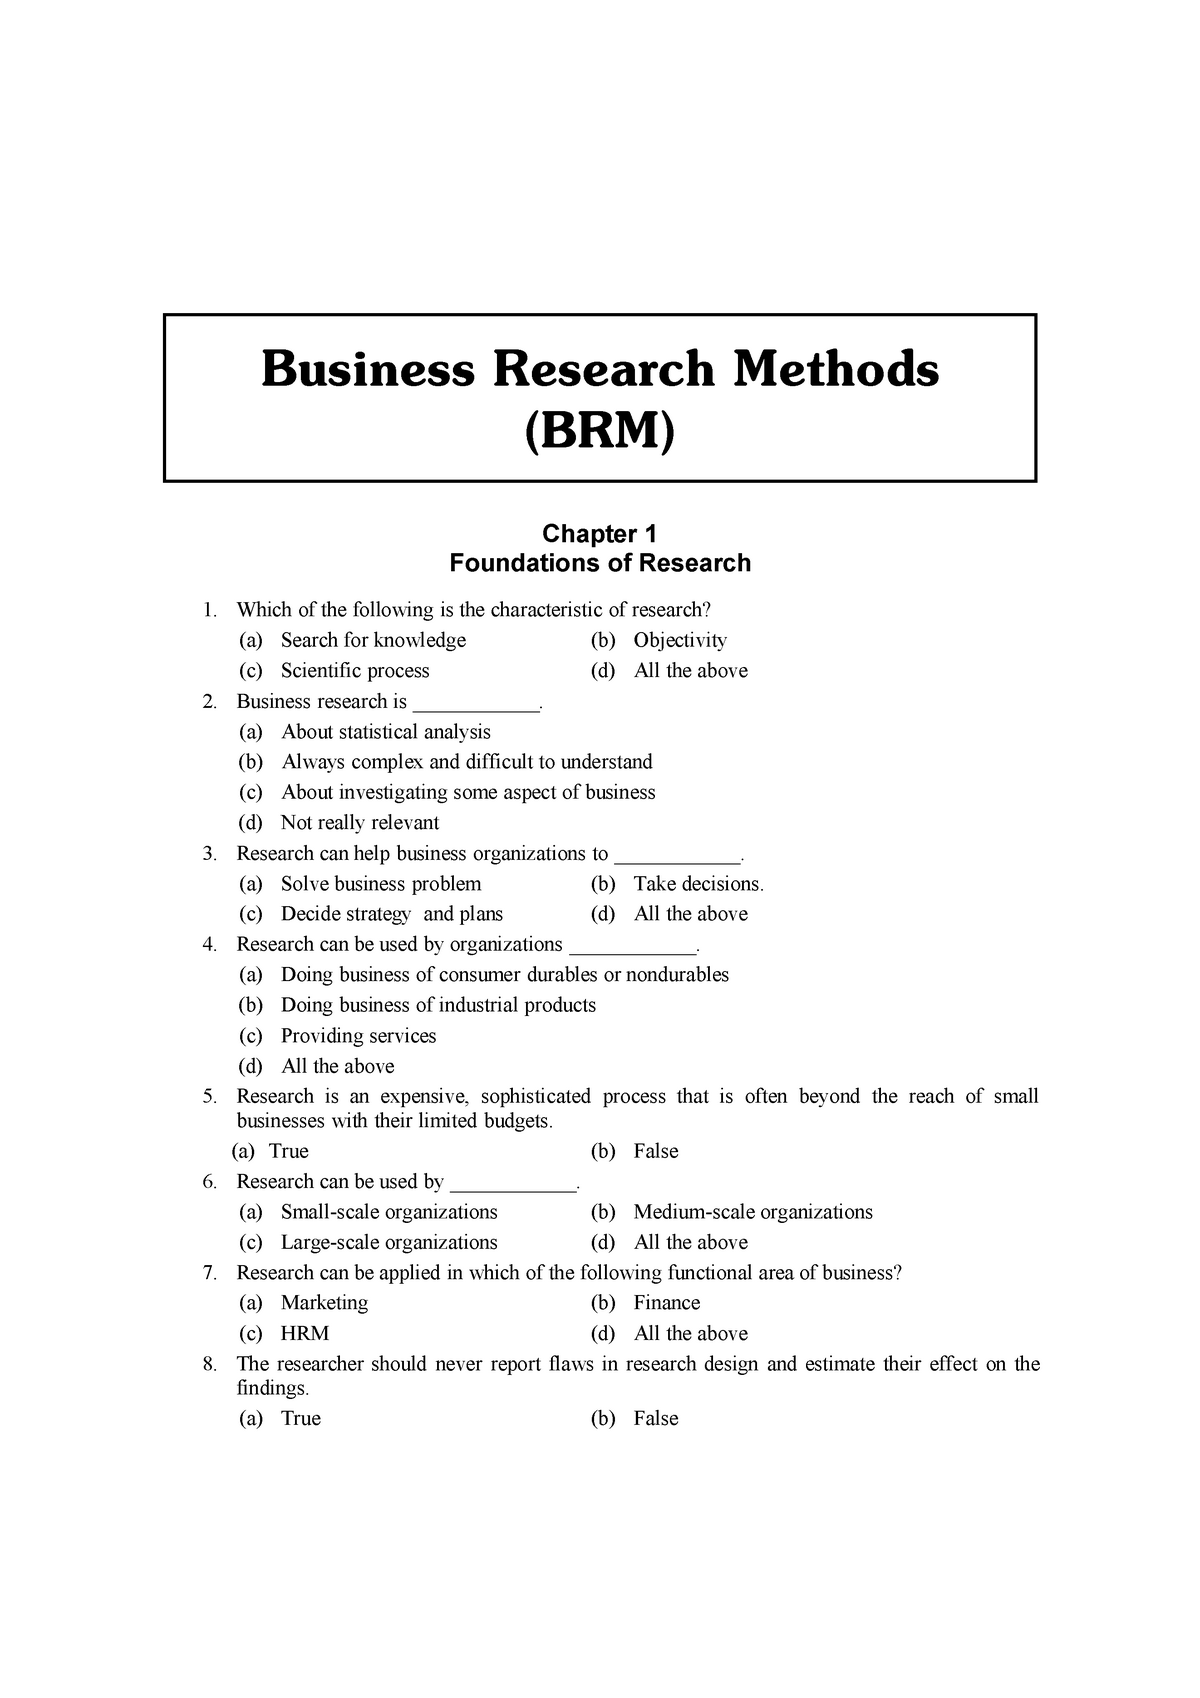 objective of research in brm